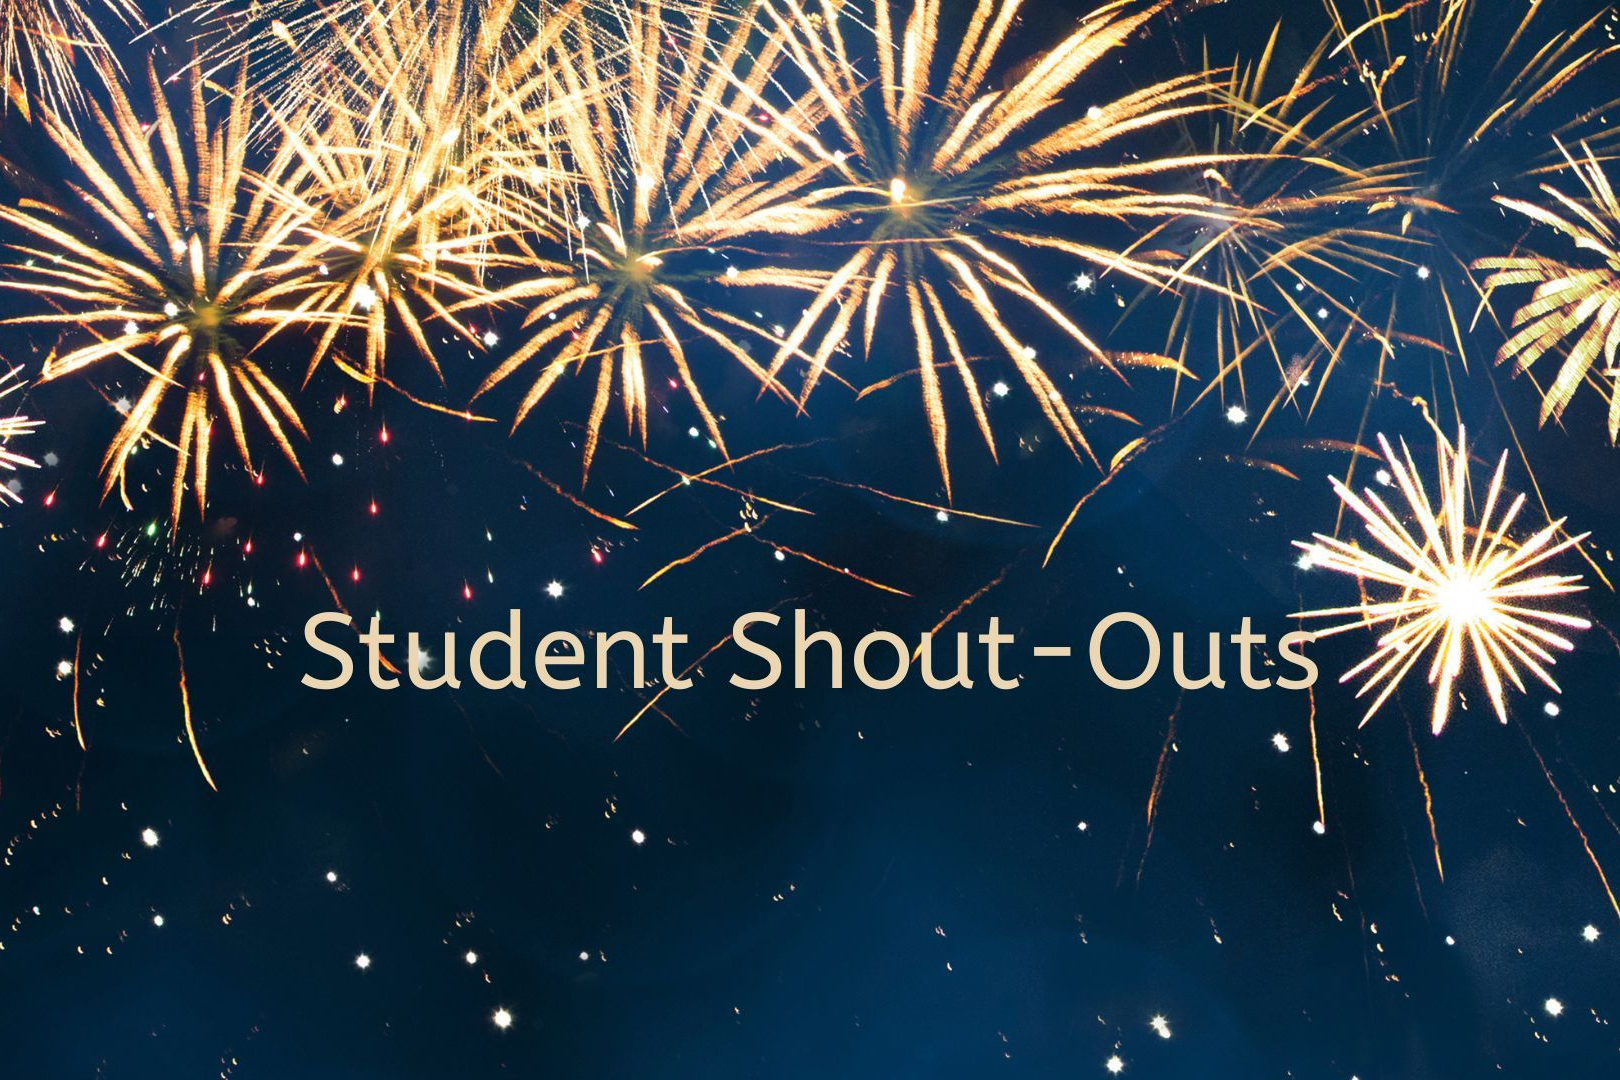 Student Shout Out